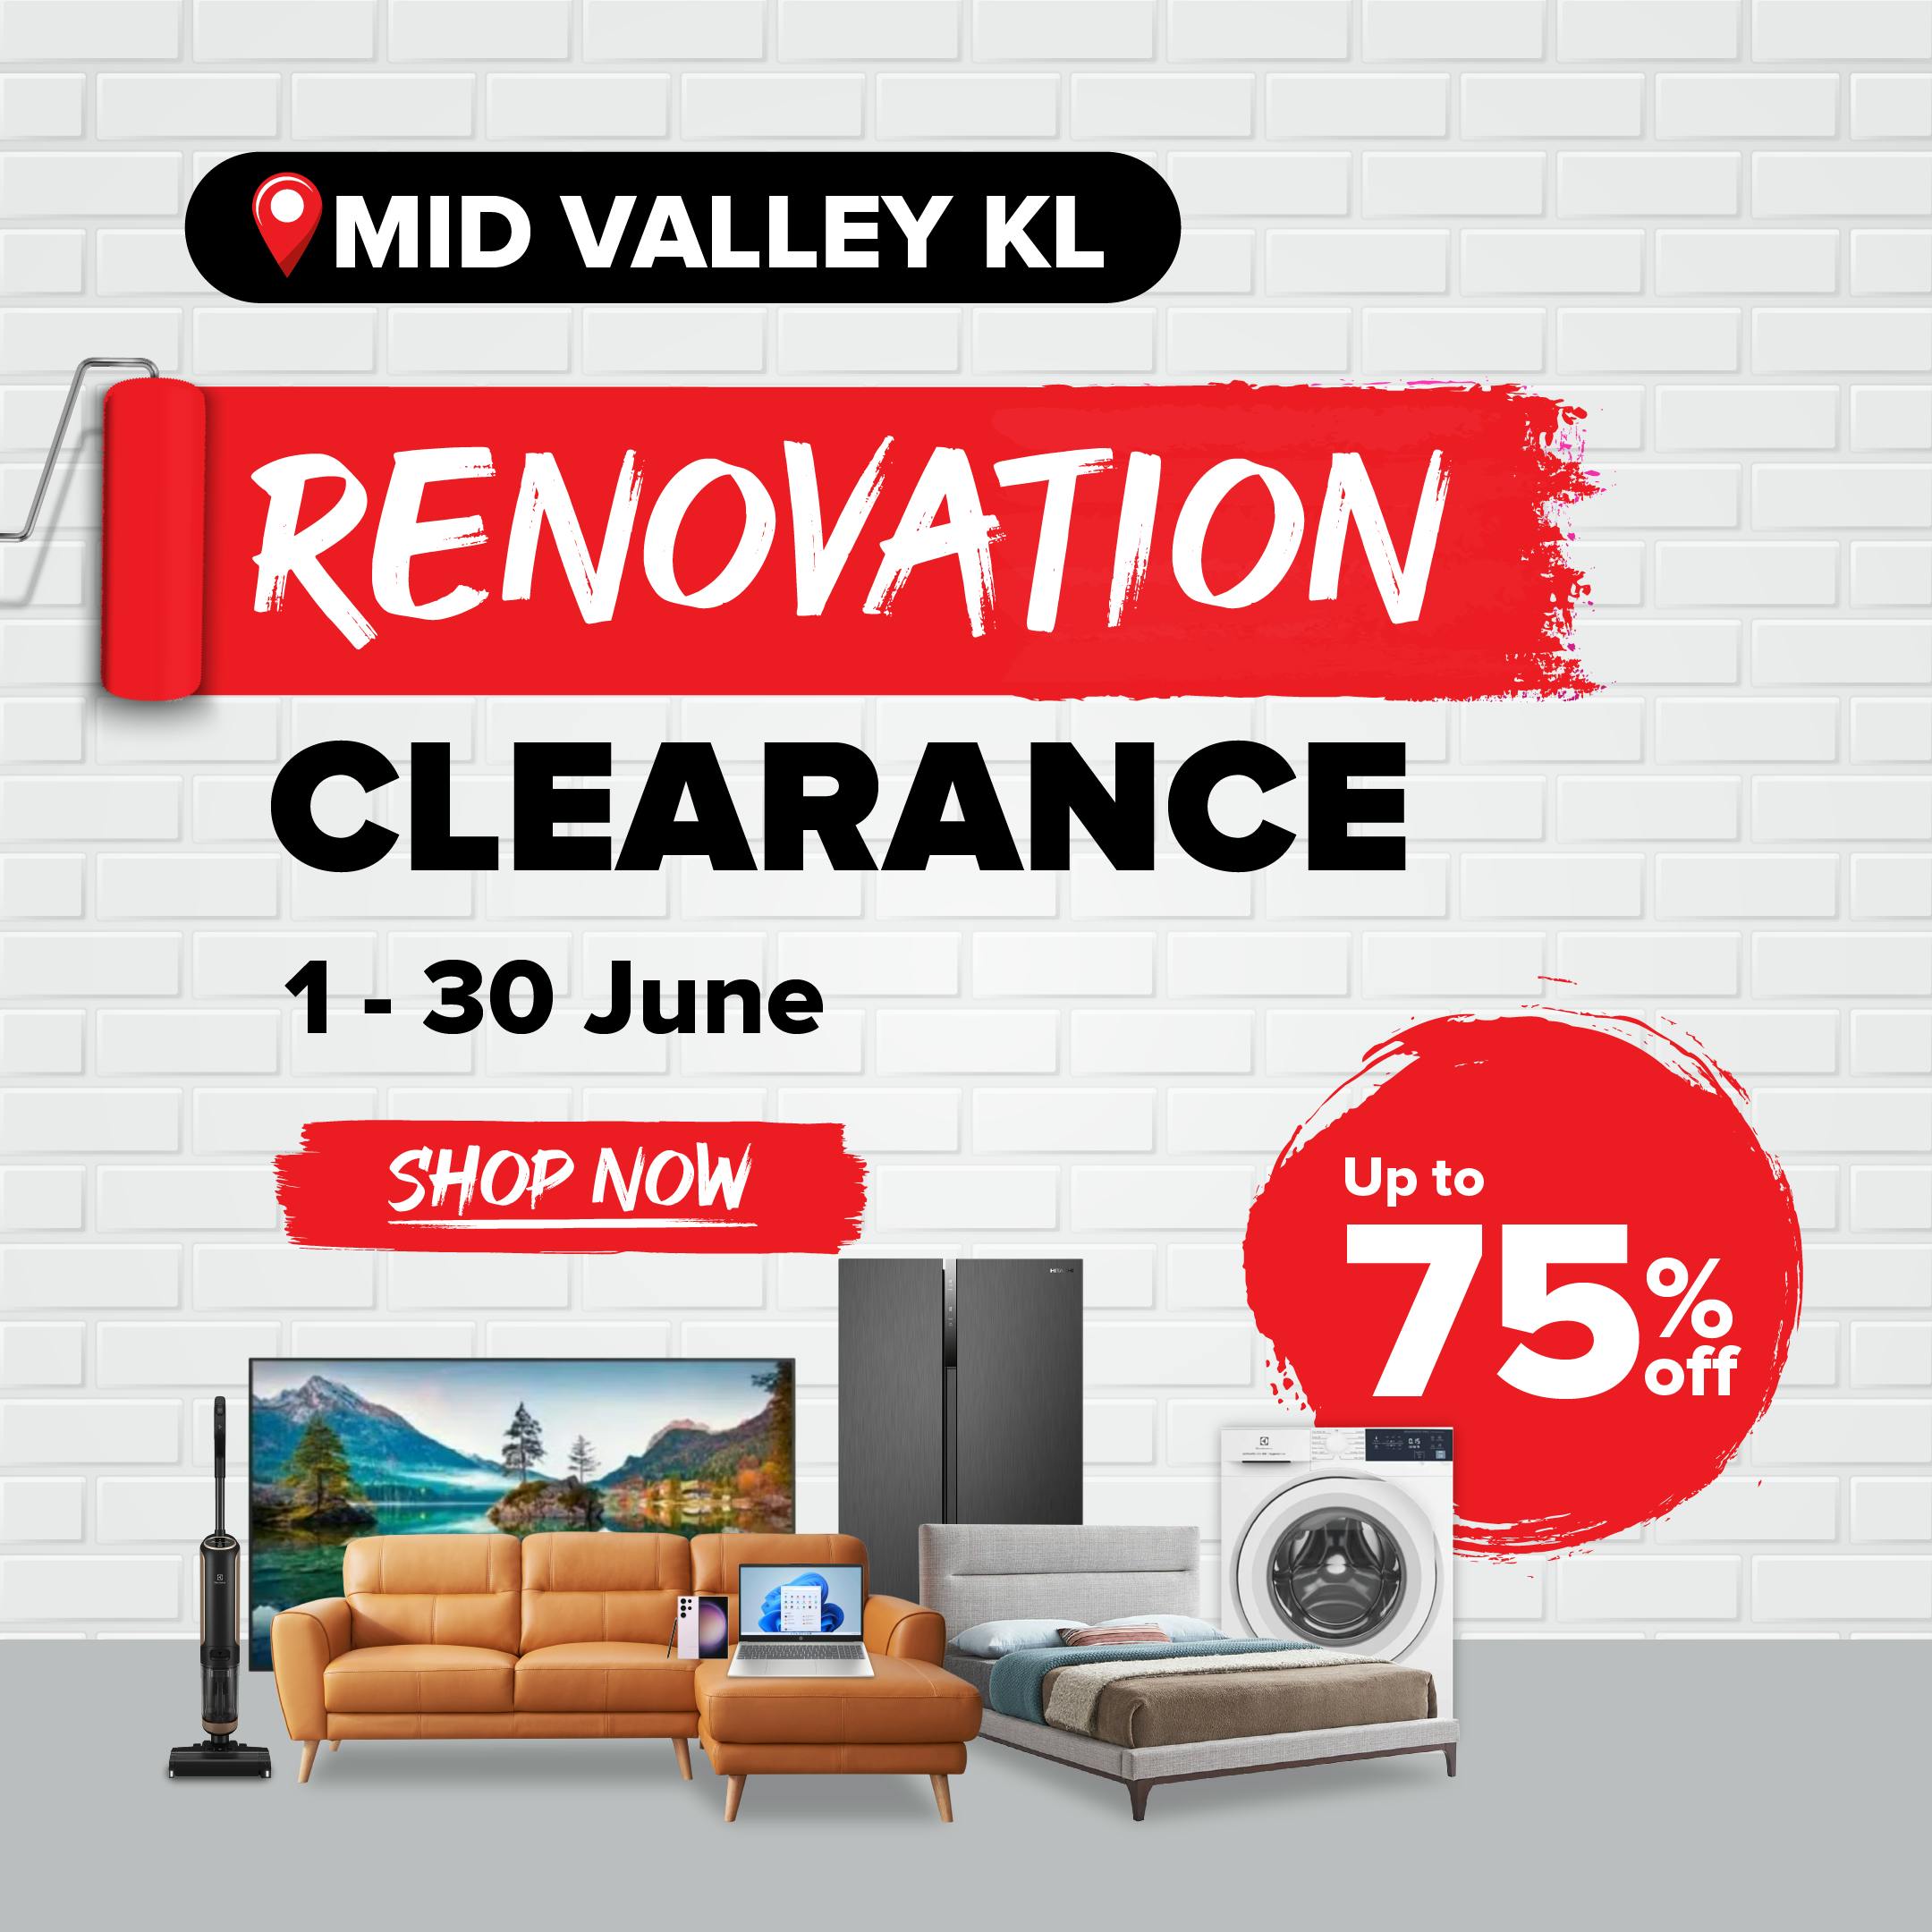 Mid Valley Renovation Clearance